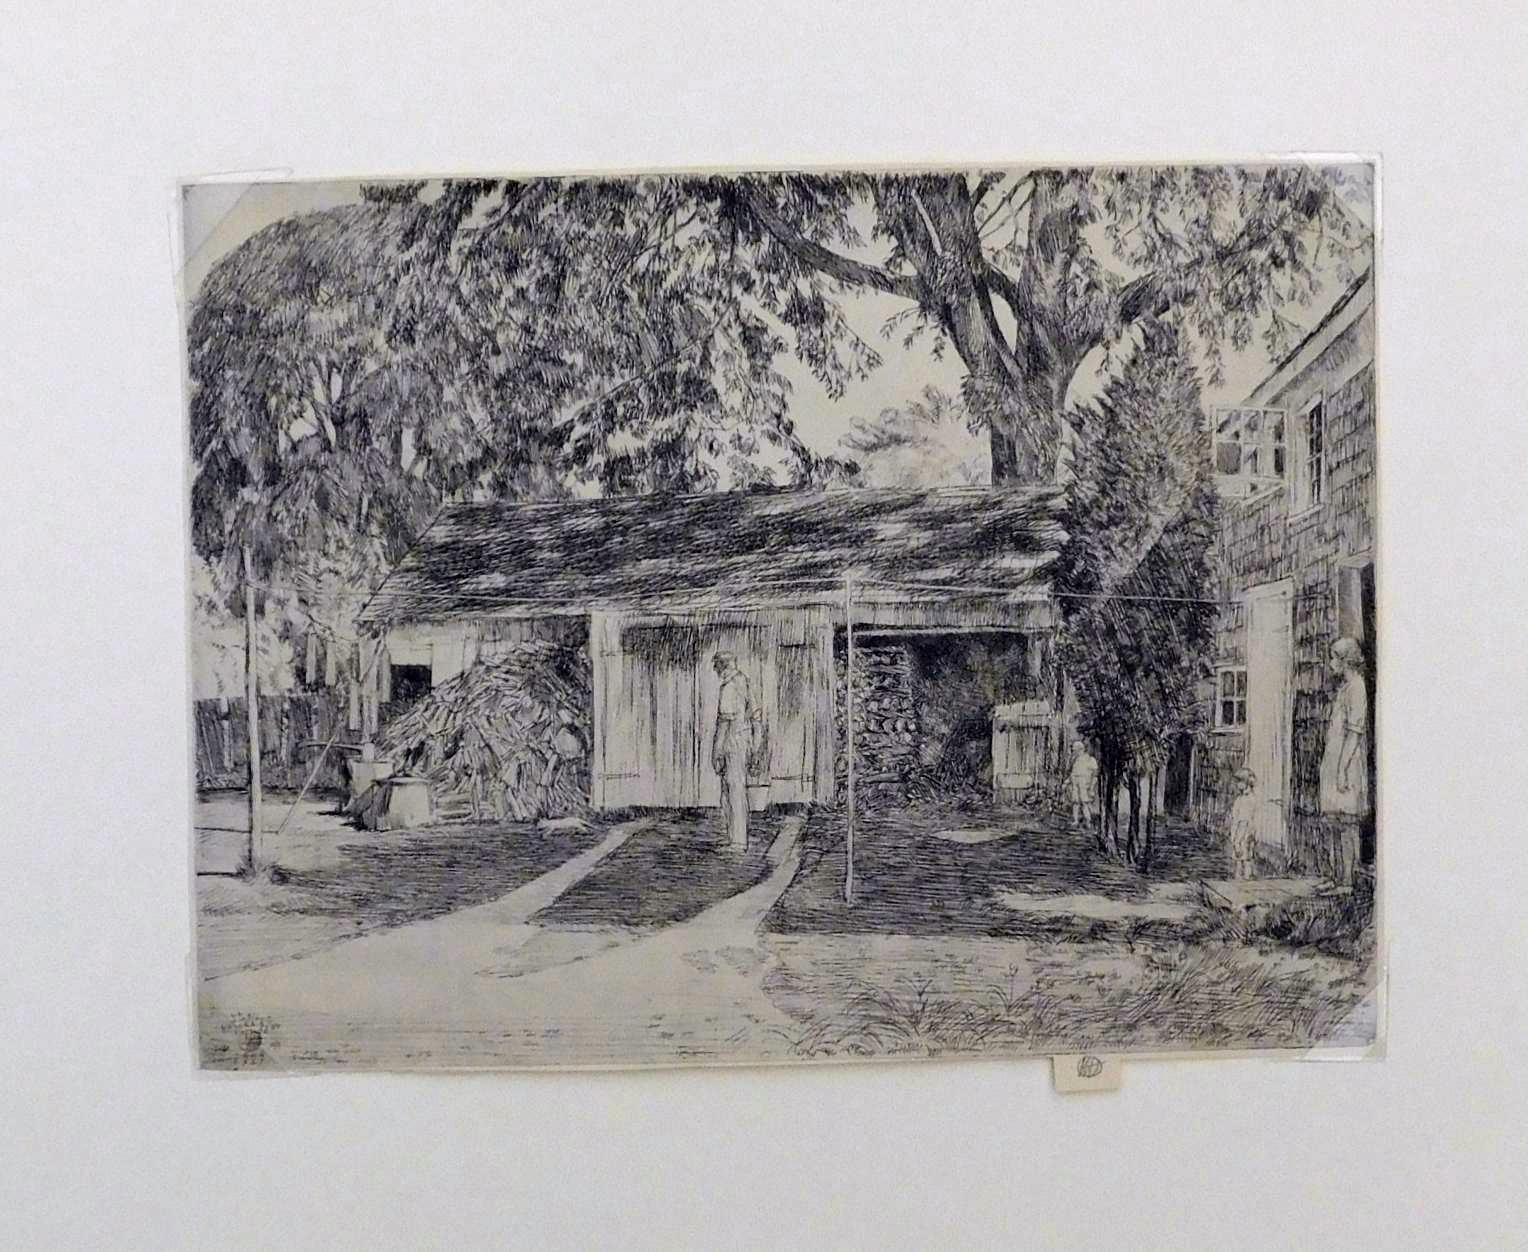 Paper Childe Hassam Original Etching, 1929 - “The Old Woodshed, Easthampton” For Sale